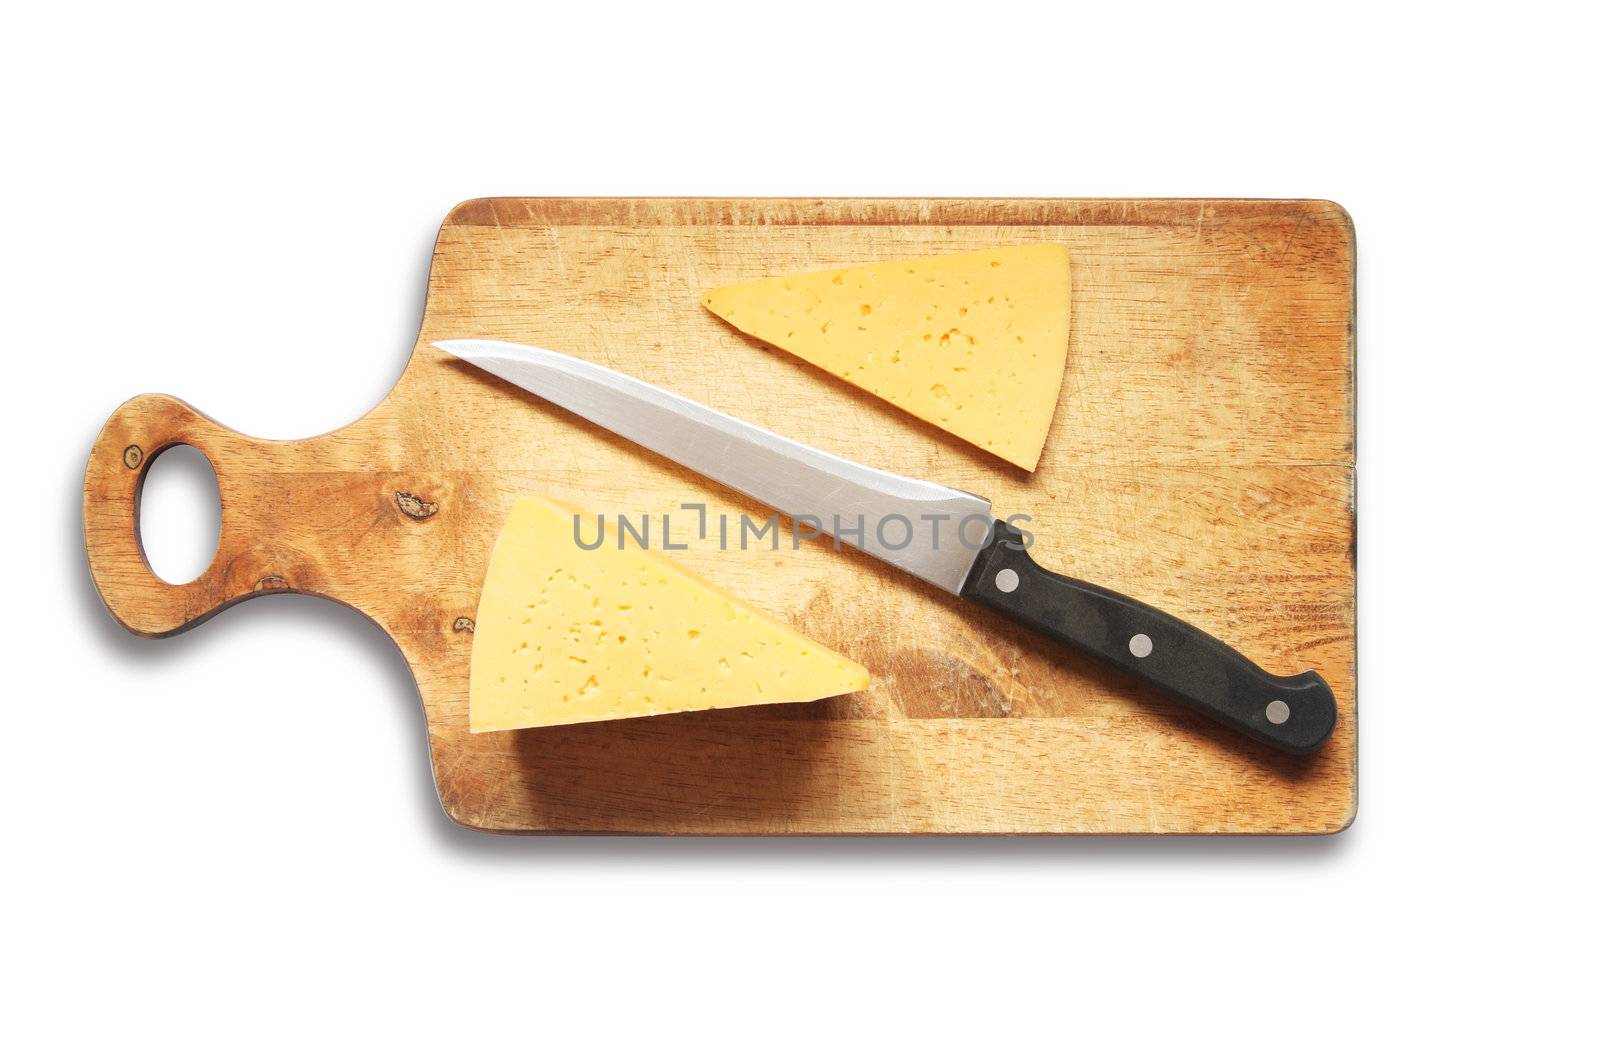 Sliced cheese and kitchen knife on wooden breadboard. Isolated with clipping path